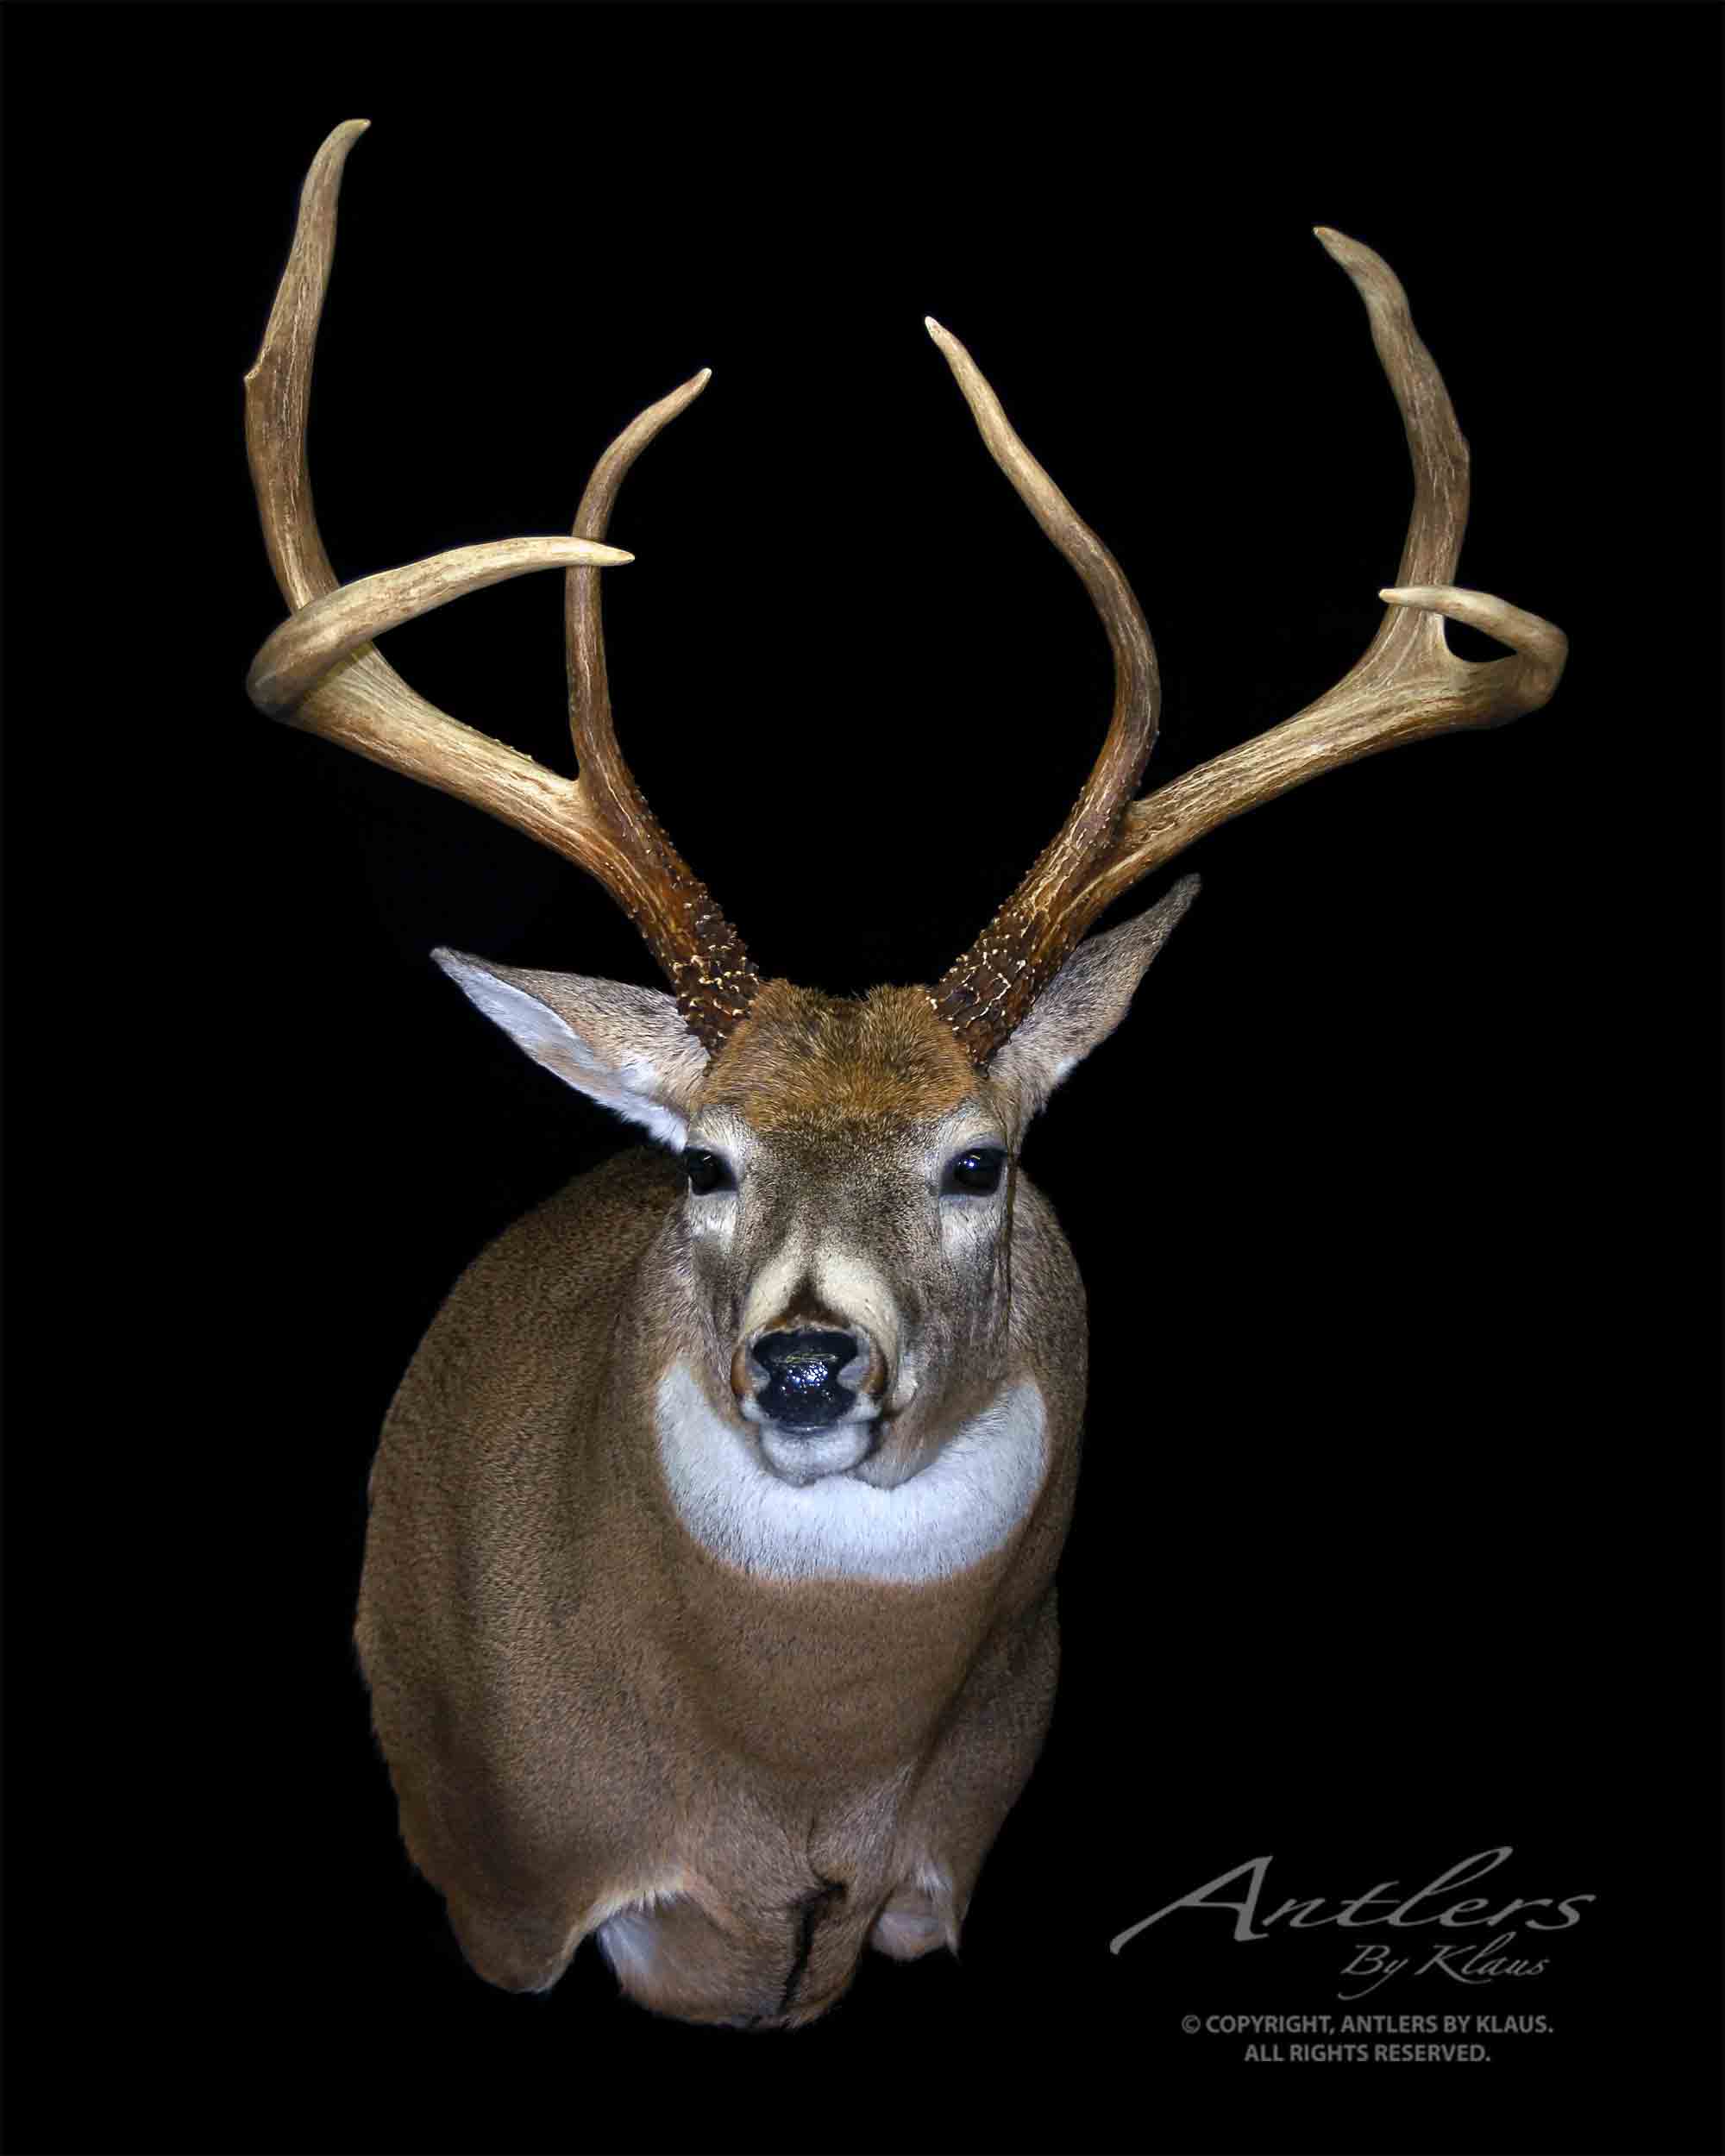 Largest Mule Deer In The World